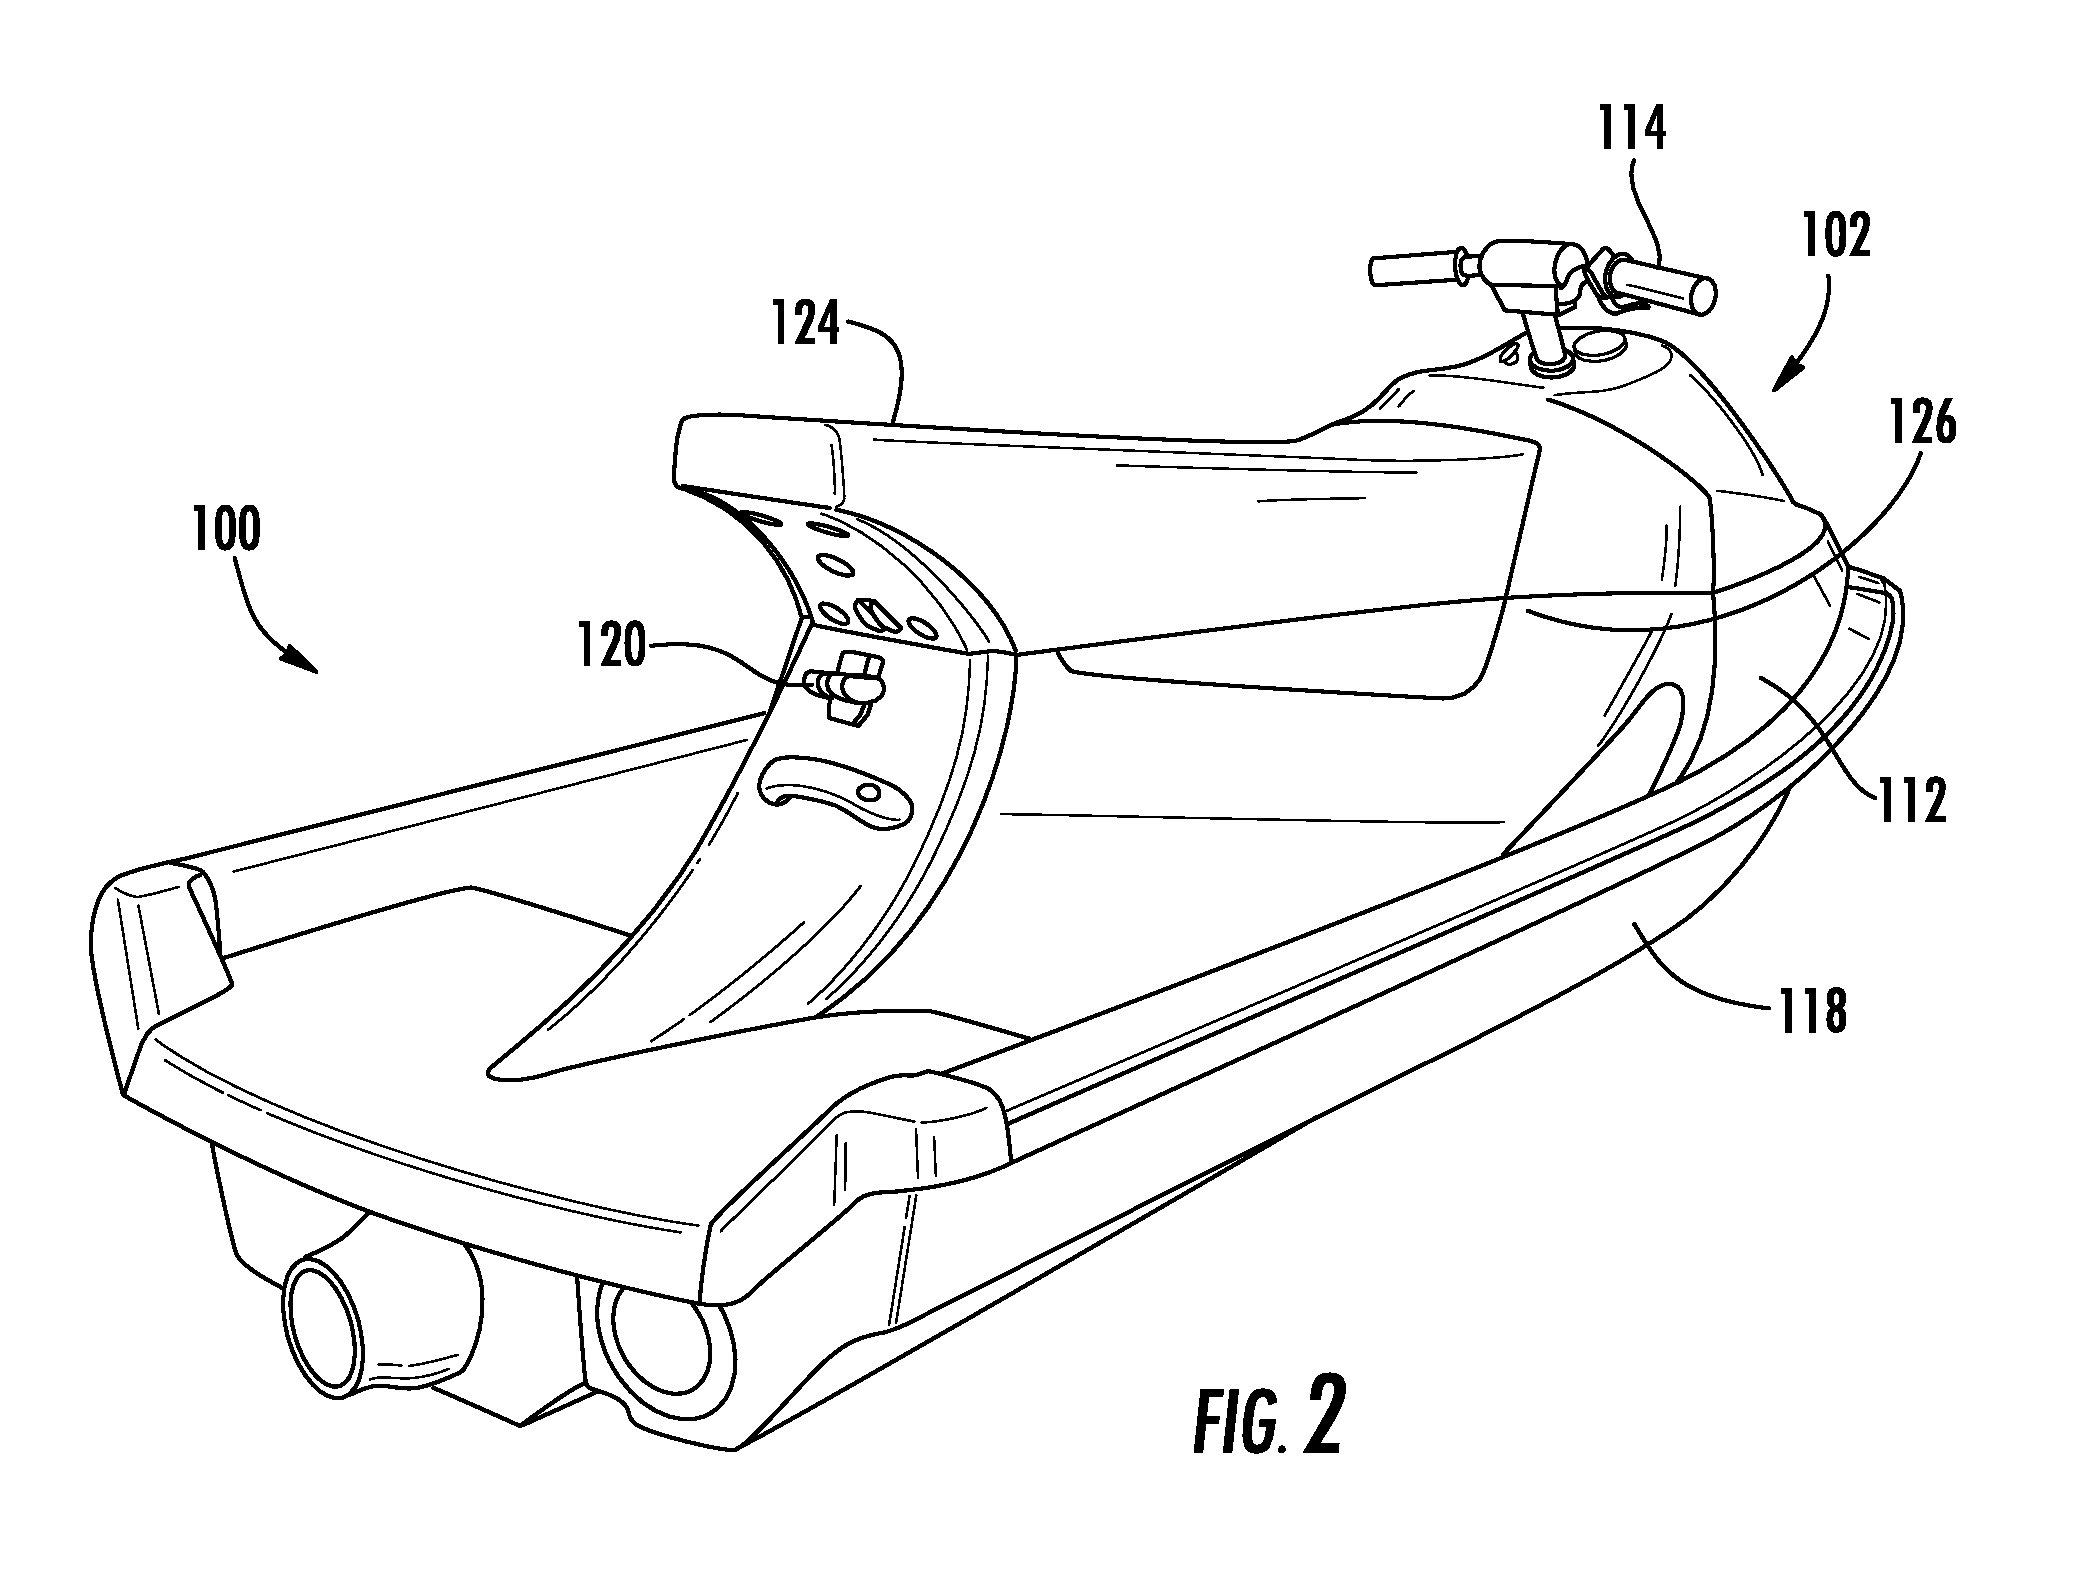 Personal watercraft having a unitary seat and hood assembly